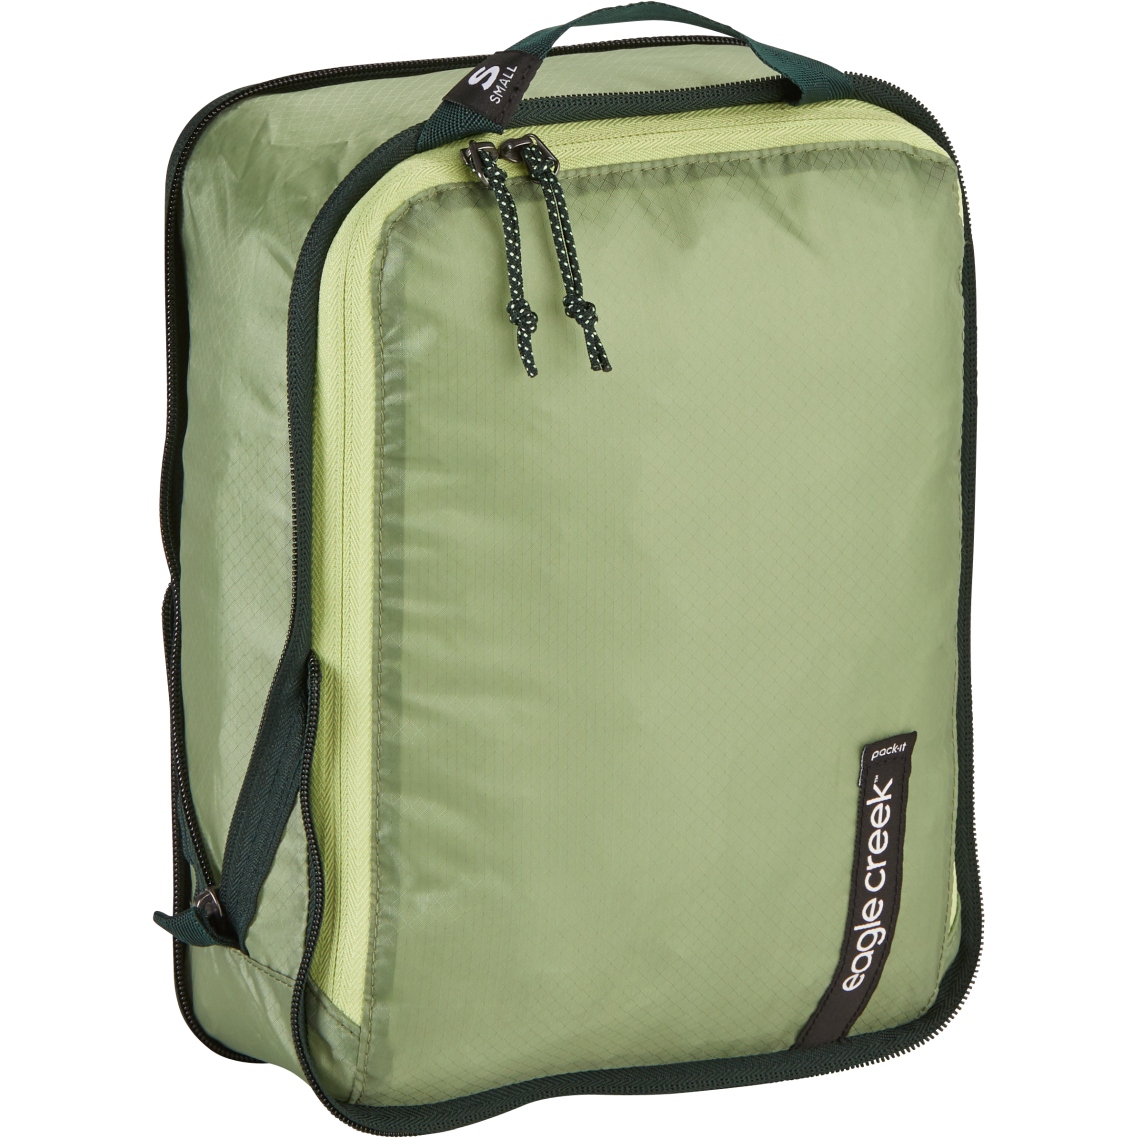 Productfoto van Eagle Creek Pack-It™ Isolate Compression Cube S - Tas Organizer - mossy green